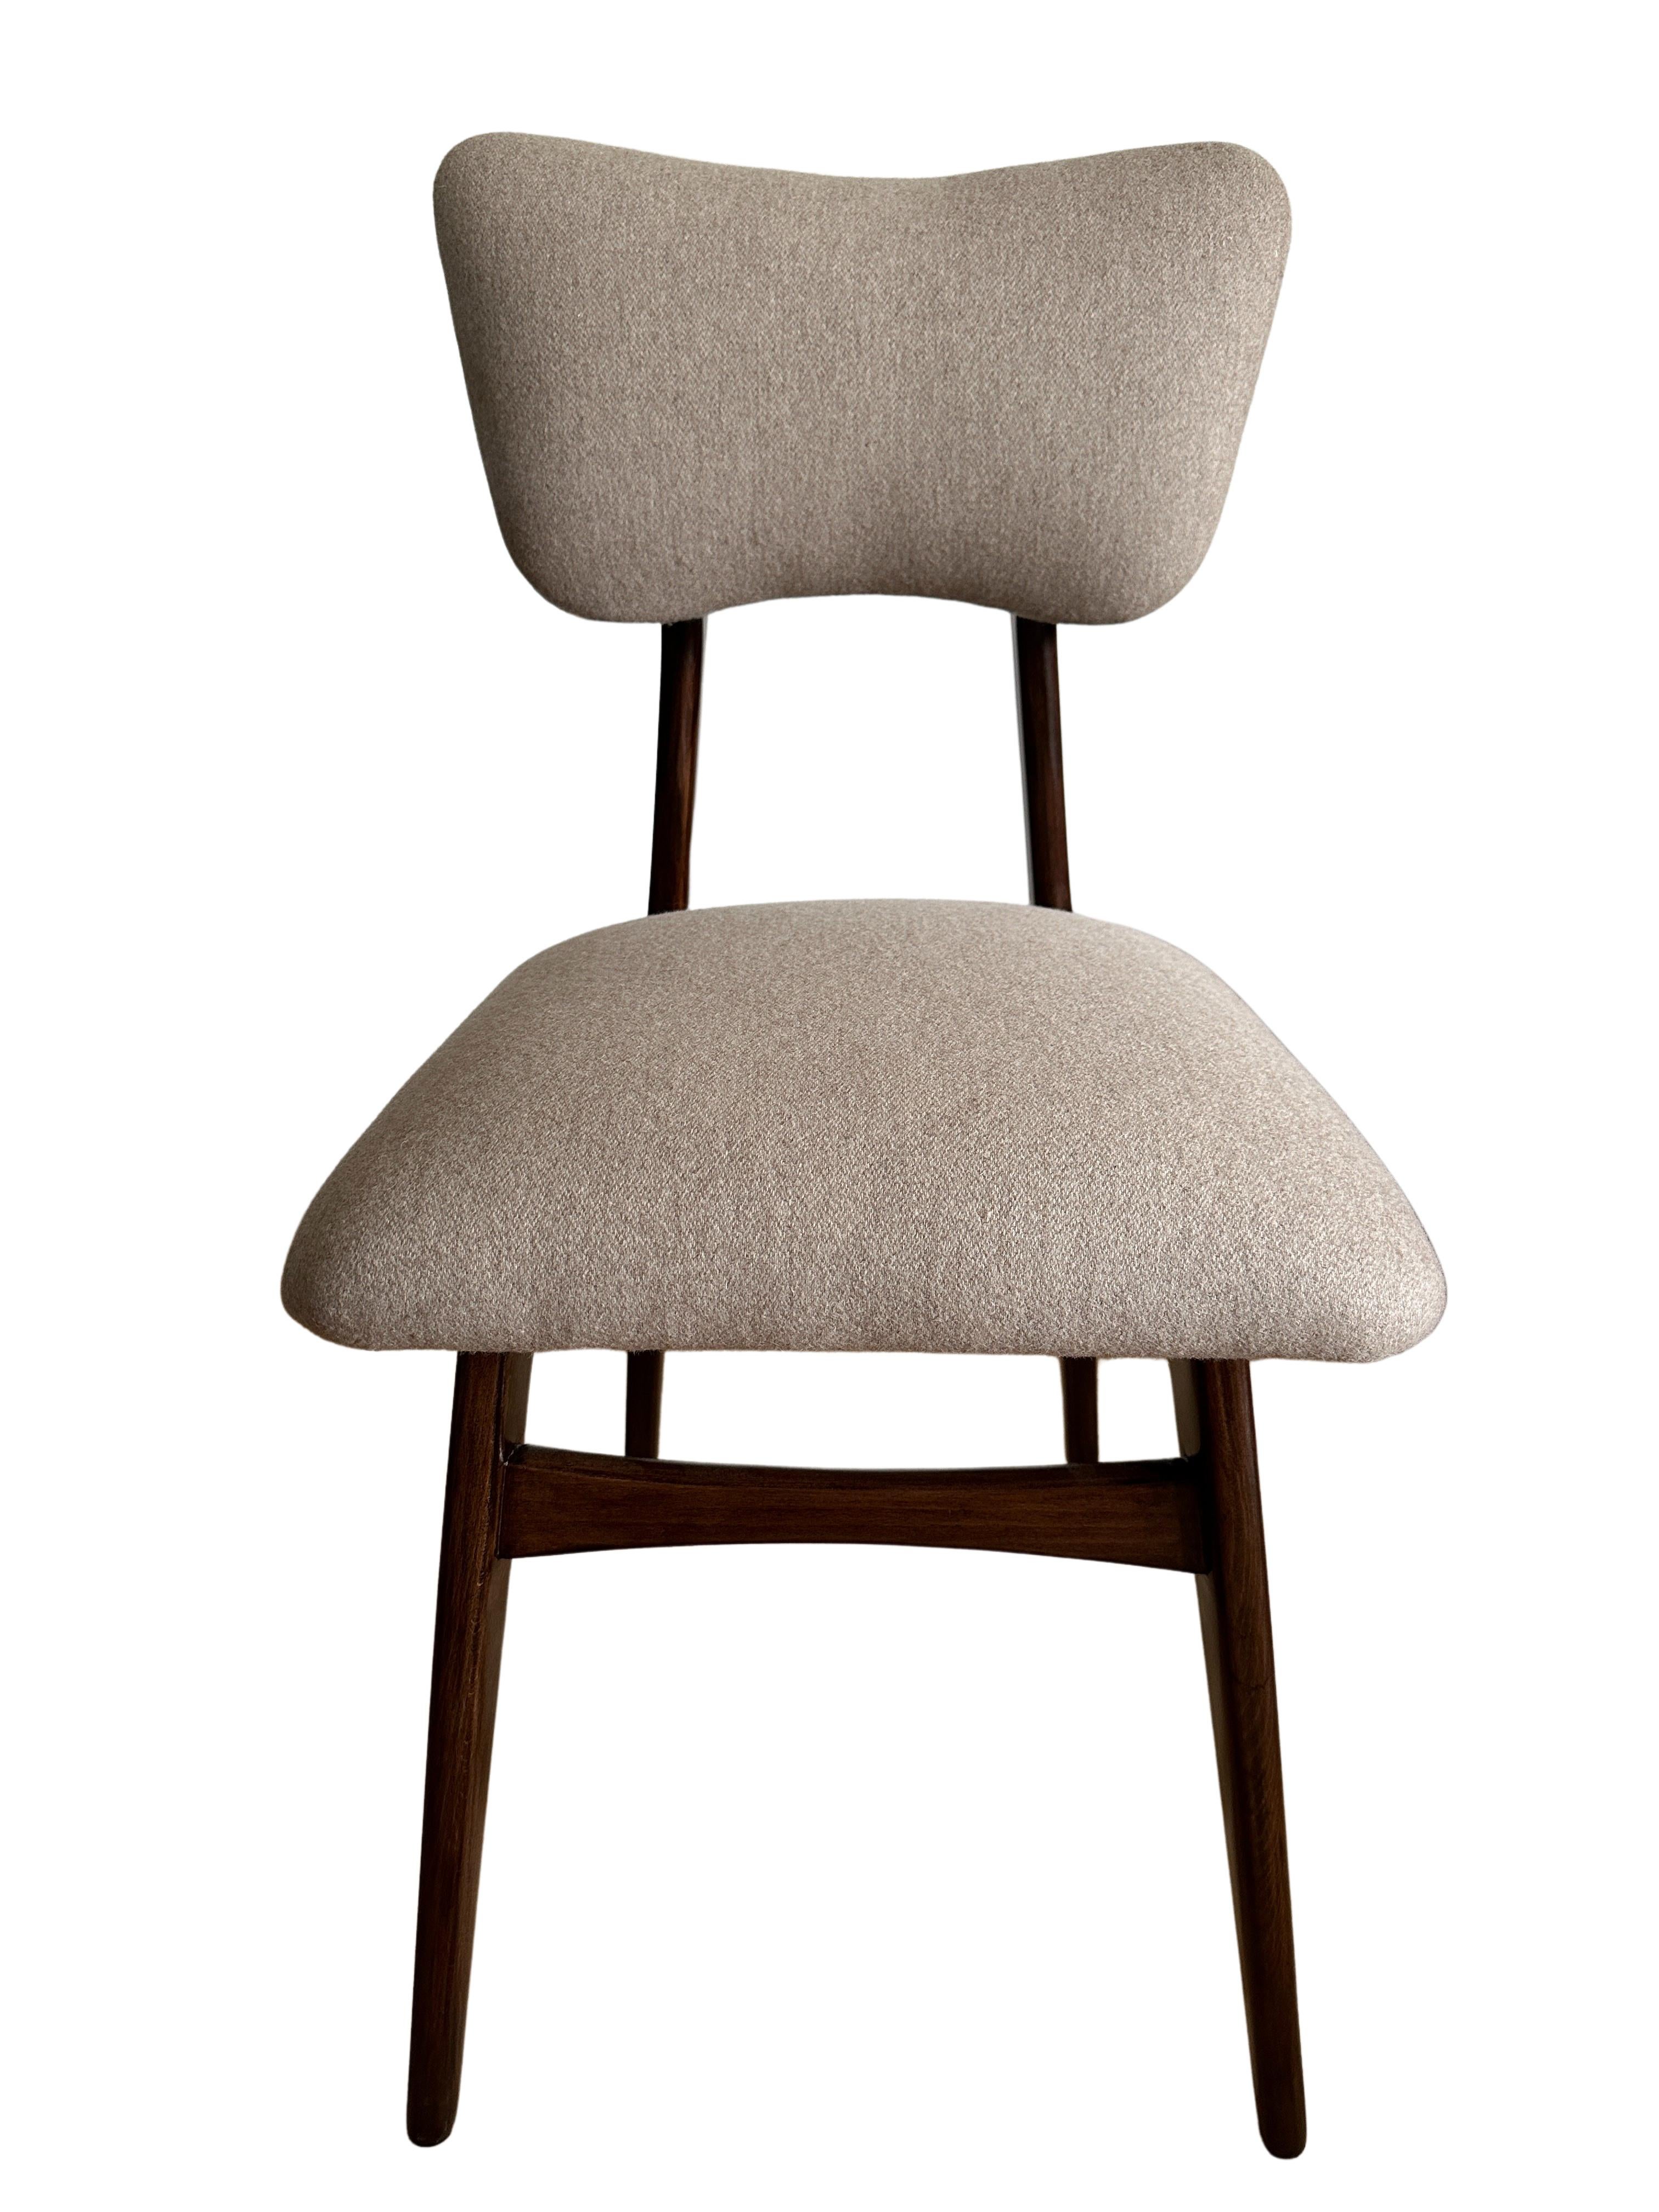 Midcentury Dining Chair in Beige Wool Upholstery, Poland, 1960s For Sale 2